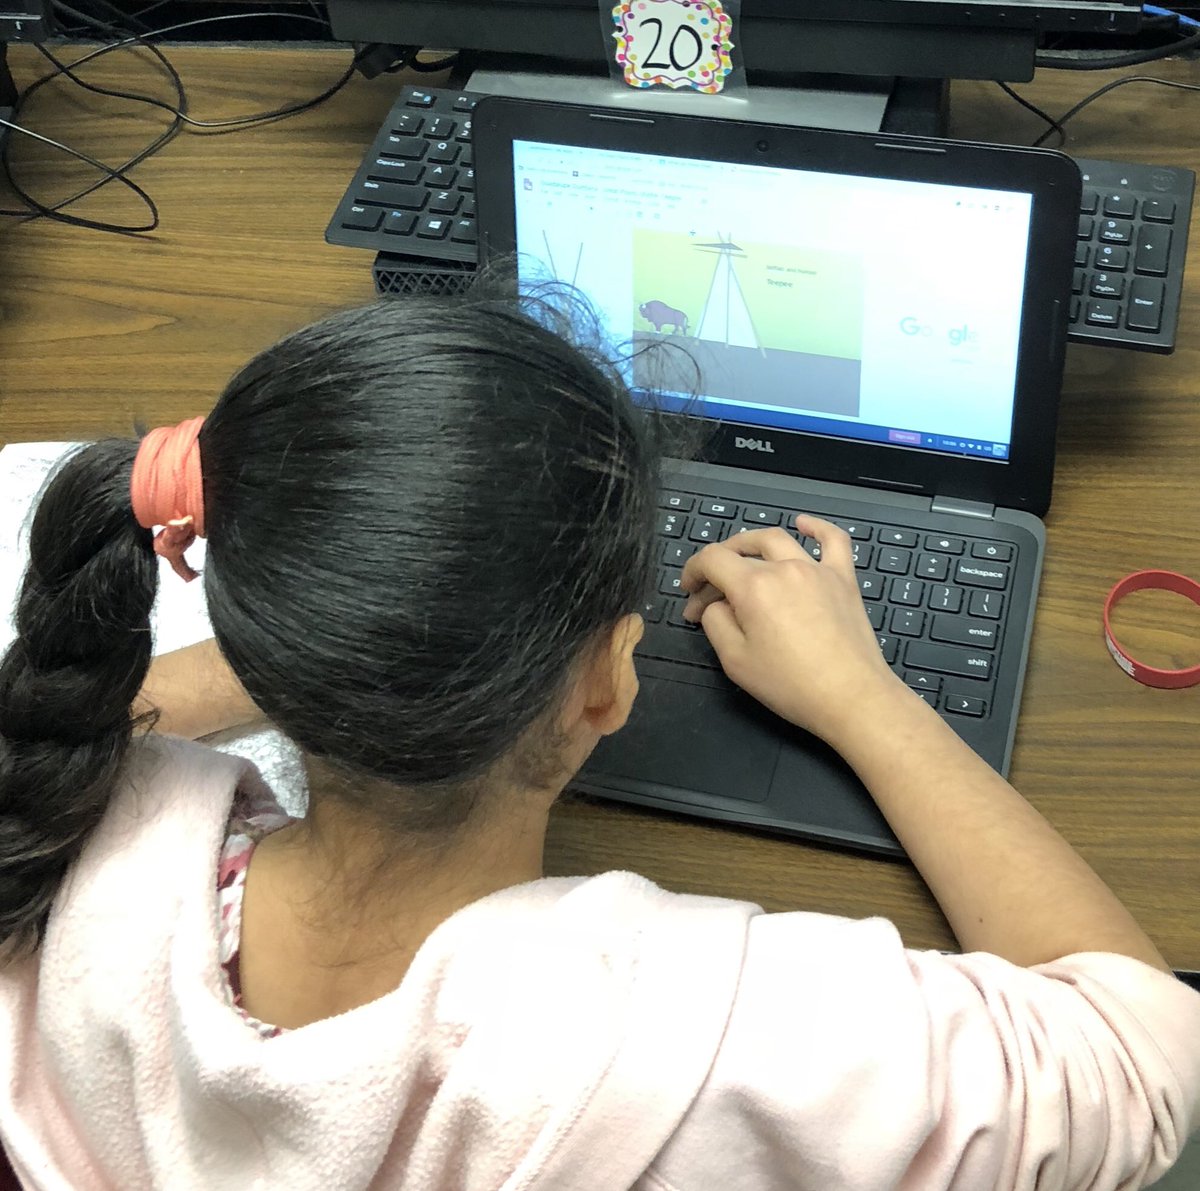 We ❤️ student creation tools! Third graders are researching and creating American Indian shelters in Google Drawings this week. Love seeing the creativity!! #digitallearning #googledrawings #socialstudies #studentcreation